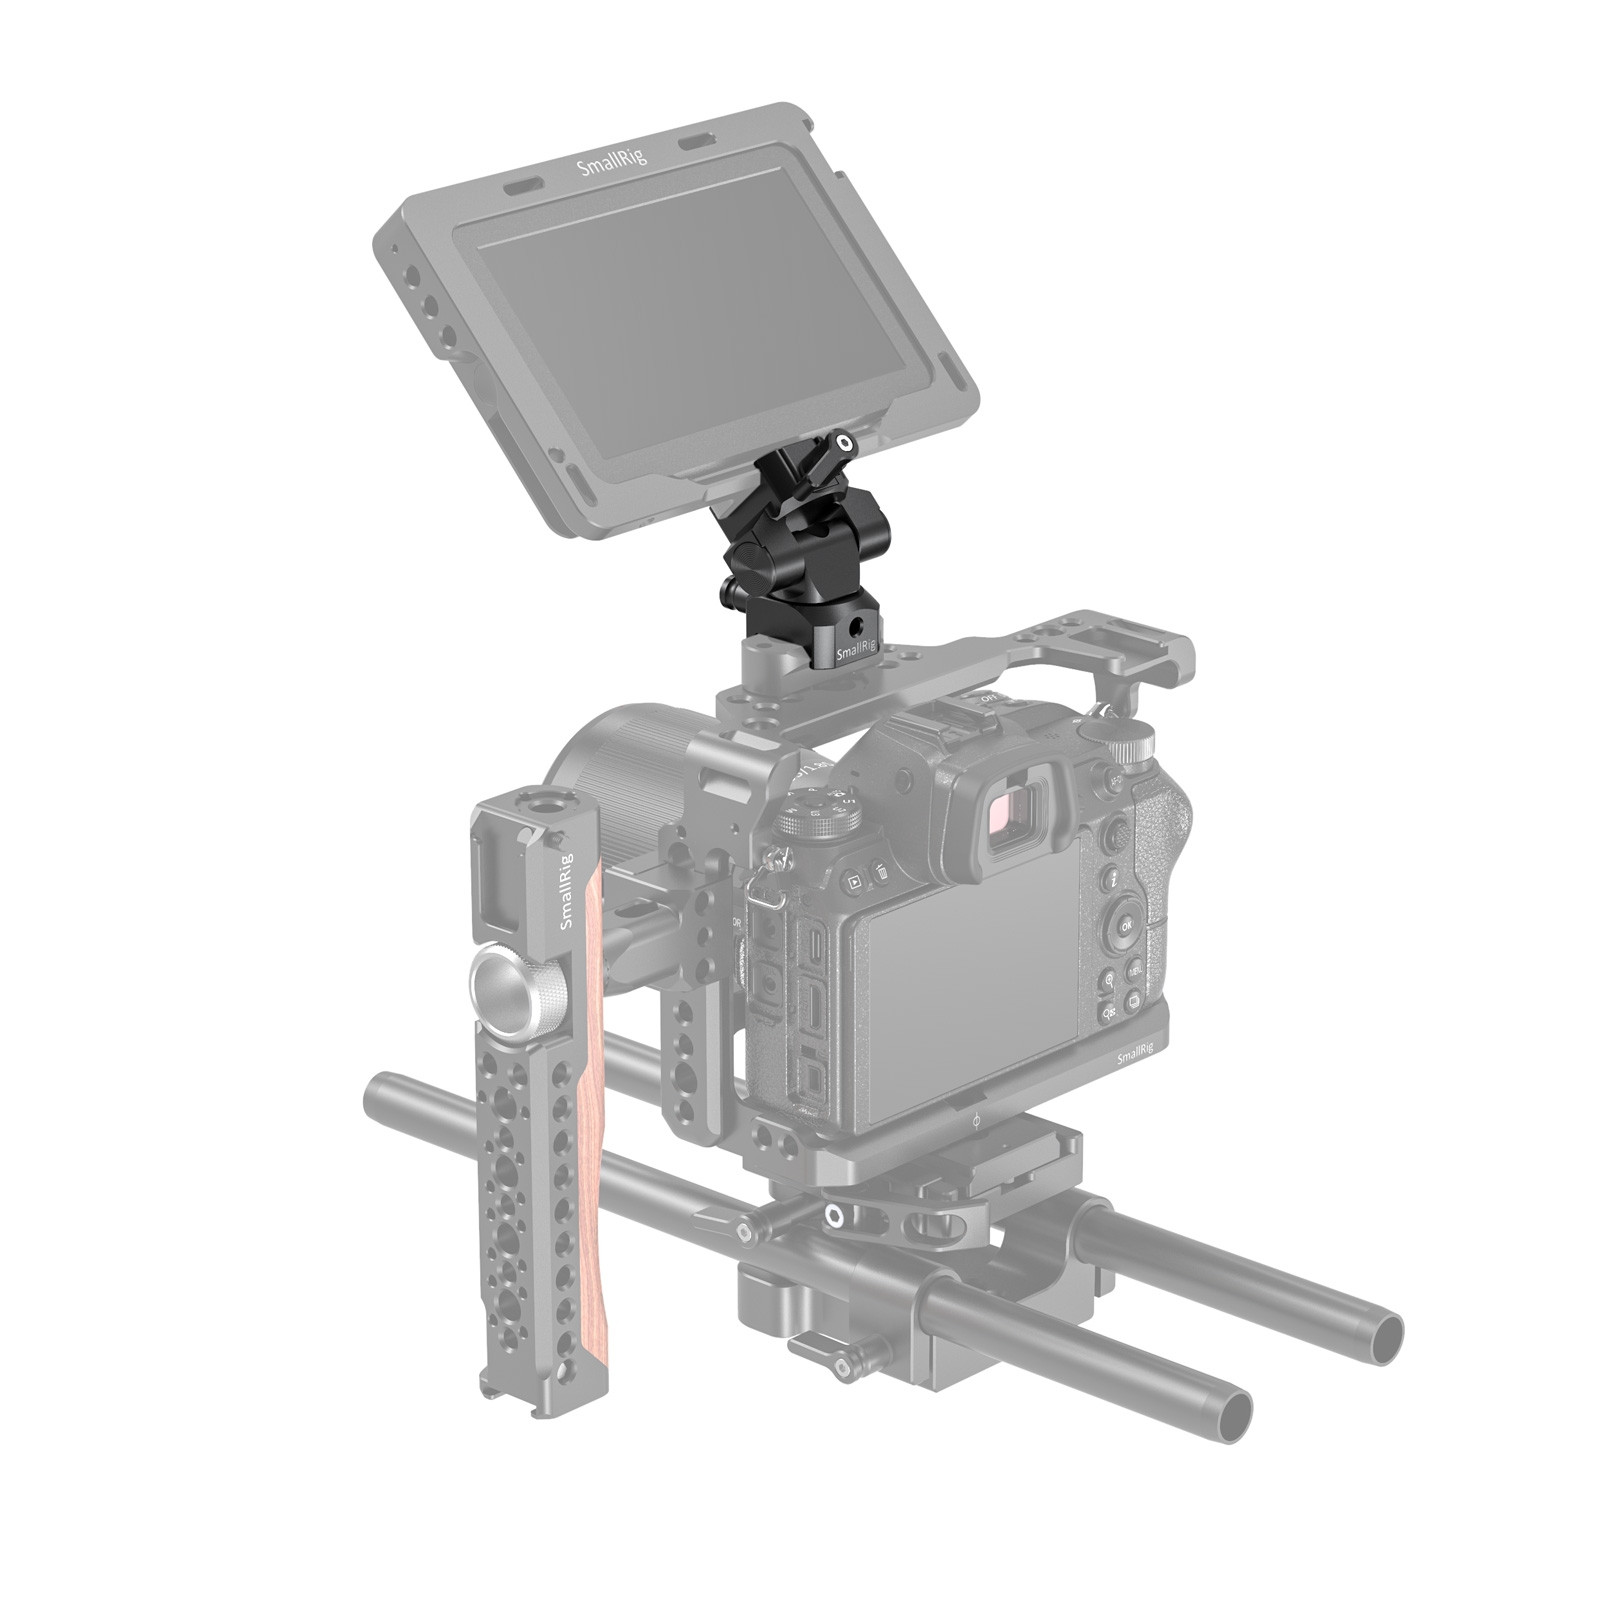 SmallRig Swivel and Tilt Monitor Mount with Nato Clamp（Both Sides） BSE2385